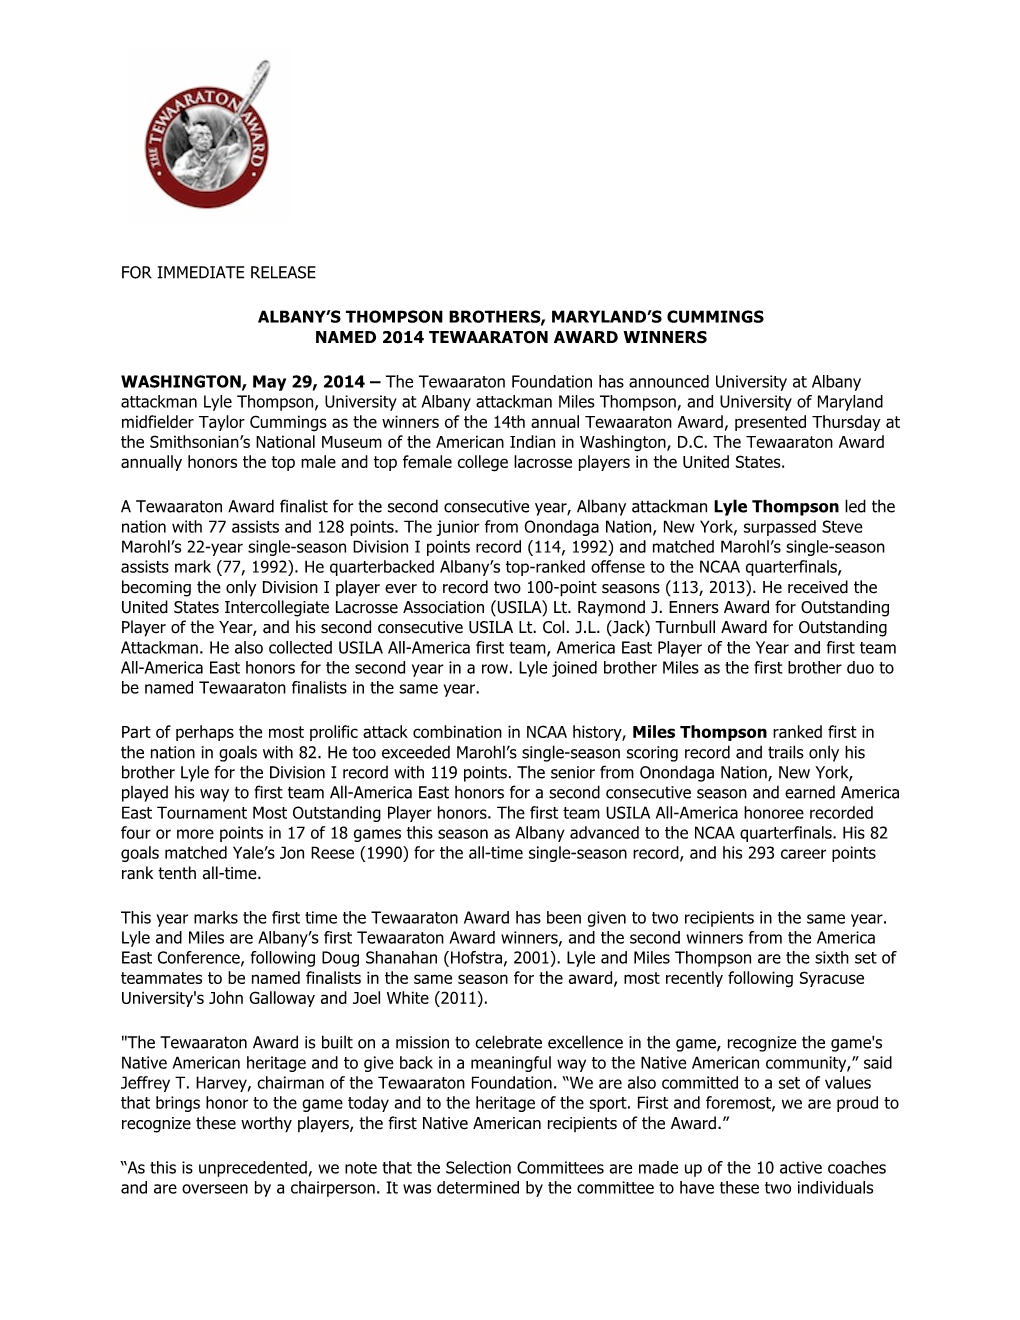 For Immediate Release Albany's Thompson